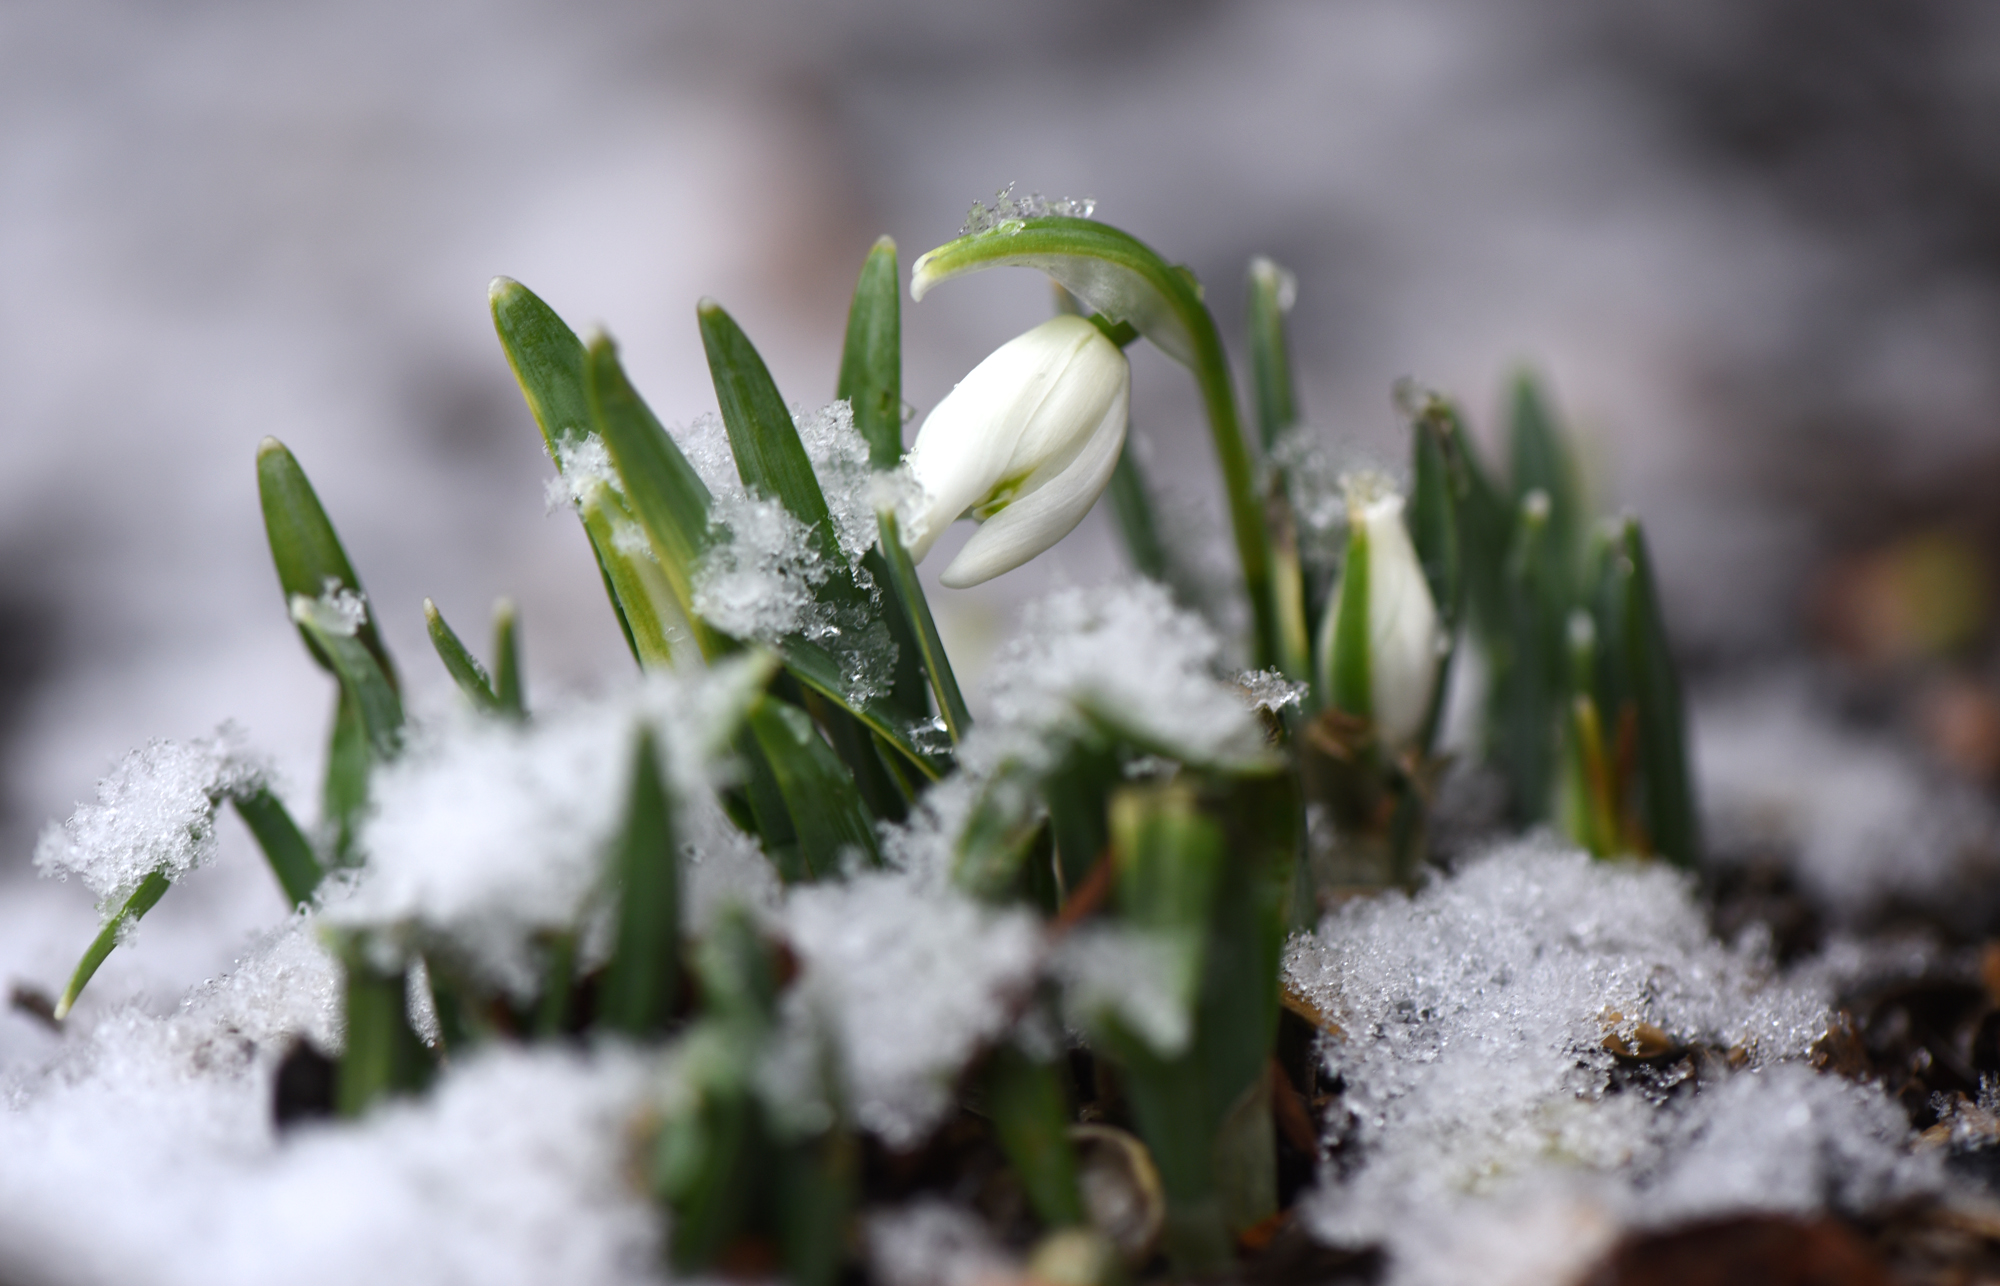 Snowdrops are one of the first flowers to bloom in the late winter.